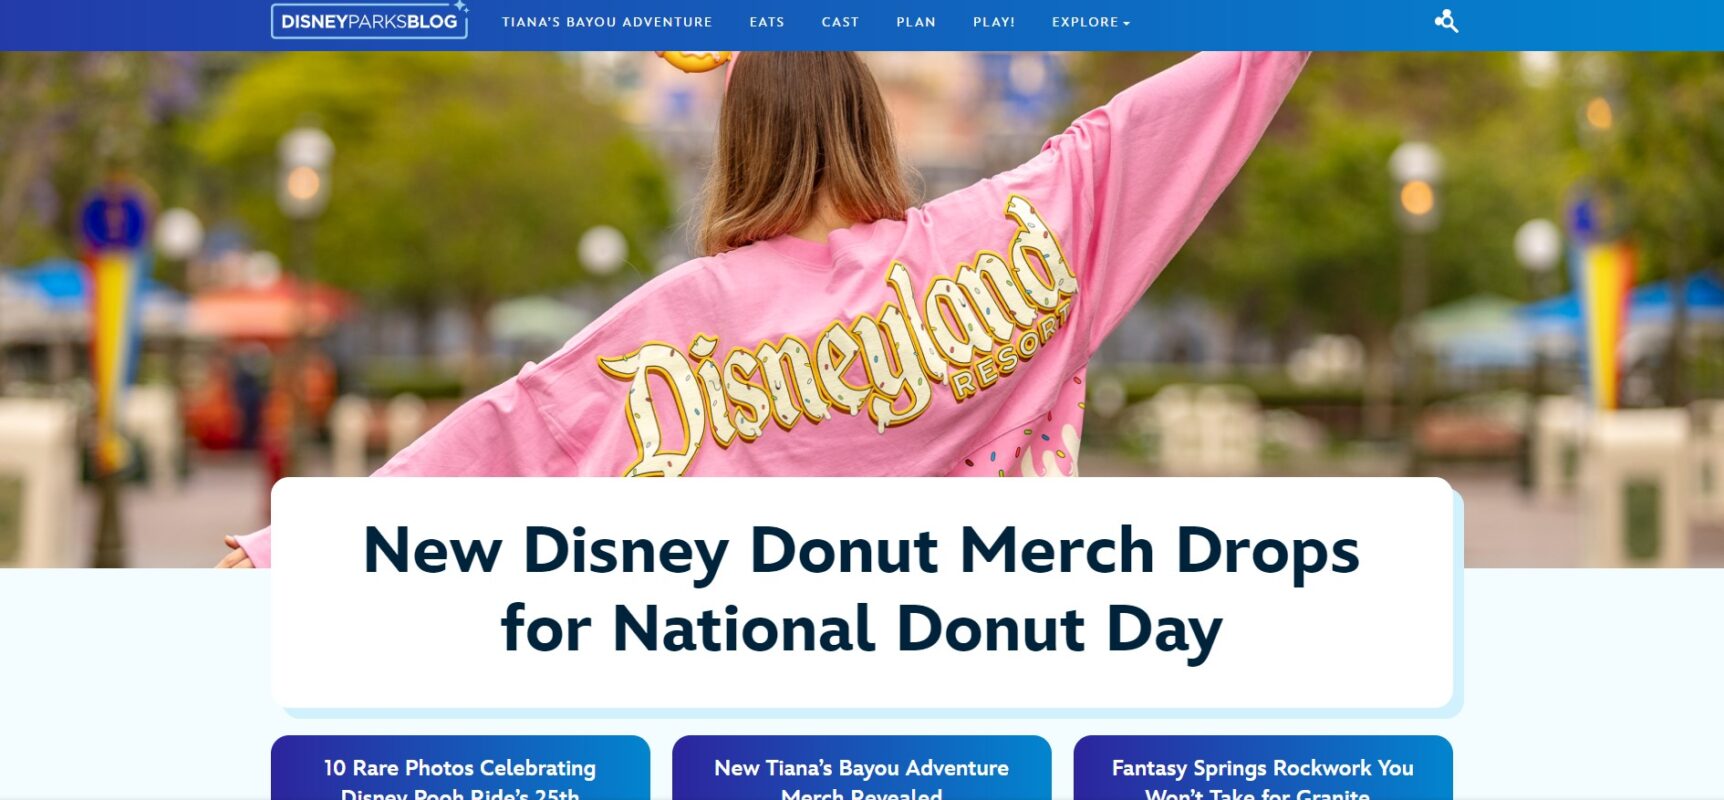 A person wearing a pink jacket with "Disneyland Resort" on the back faces away. Text reads, "New Disney Donut Merch Debuts for National Donut Day." Website navigation is visible at the top. Discover all the details on the Disney Parks Blog!